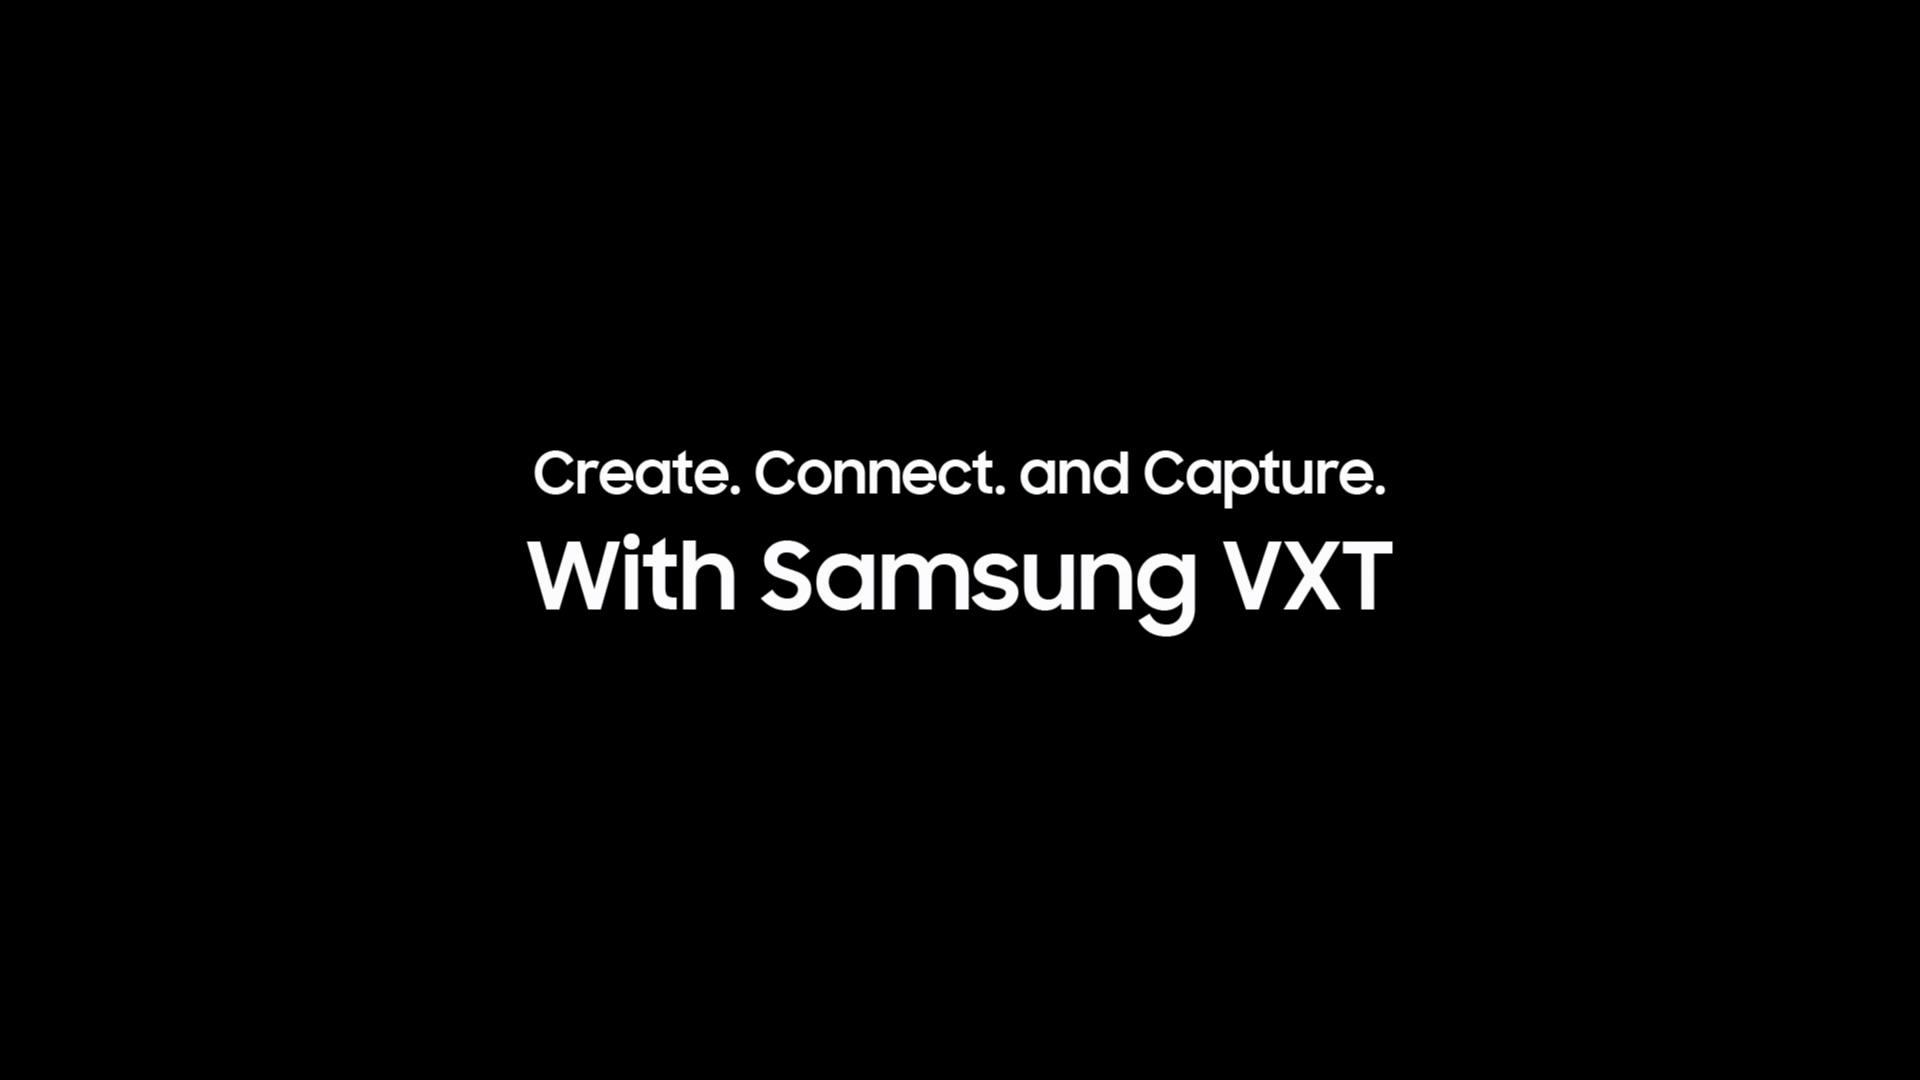 Welcome to VXT, a digital signage solution